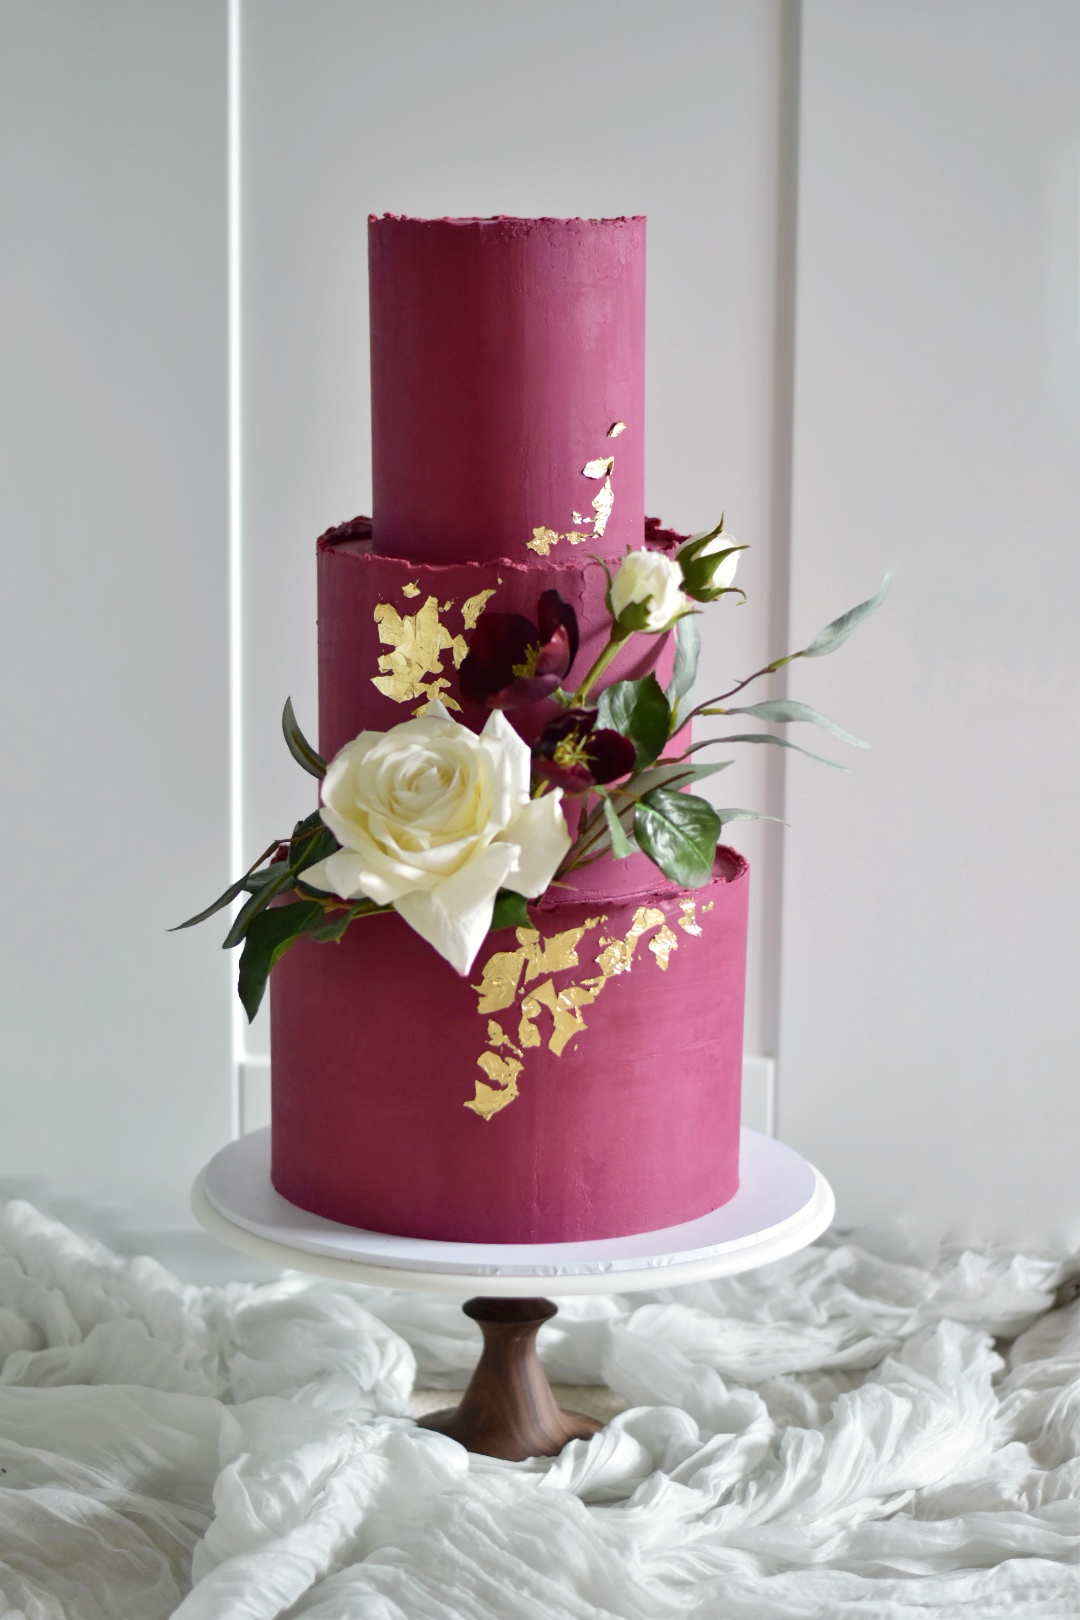 How to Choose the Wedding Cake of your Dreams | Salt Lake Bride Blog